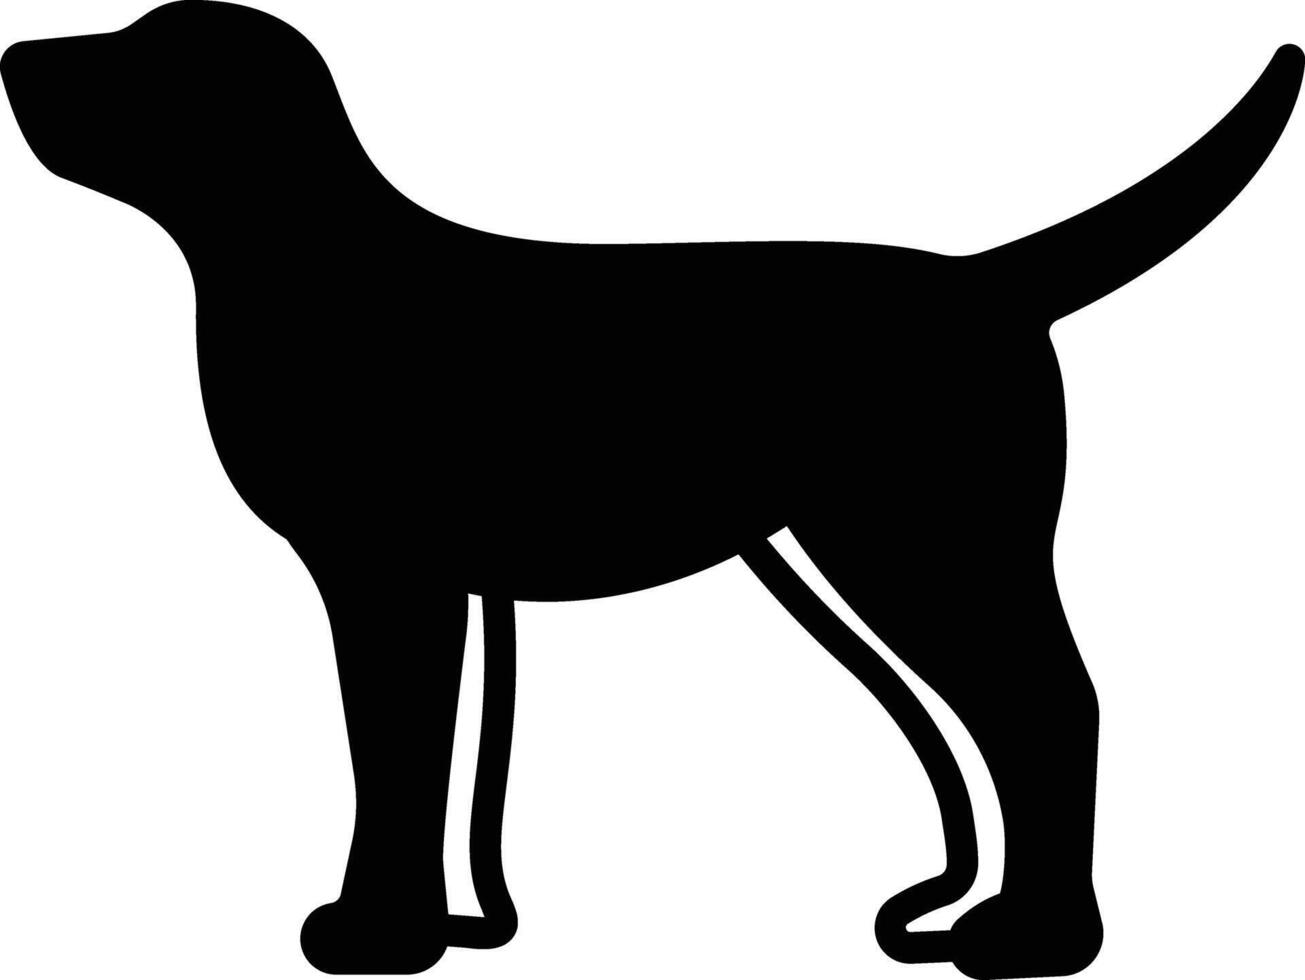 Dog face glyph and line vector illustration